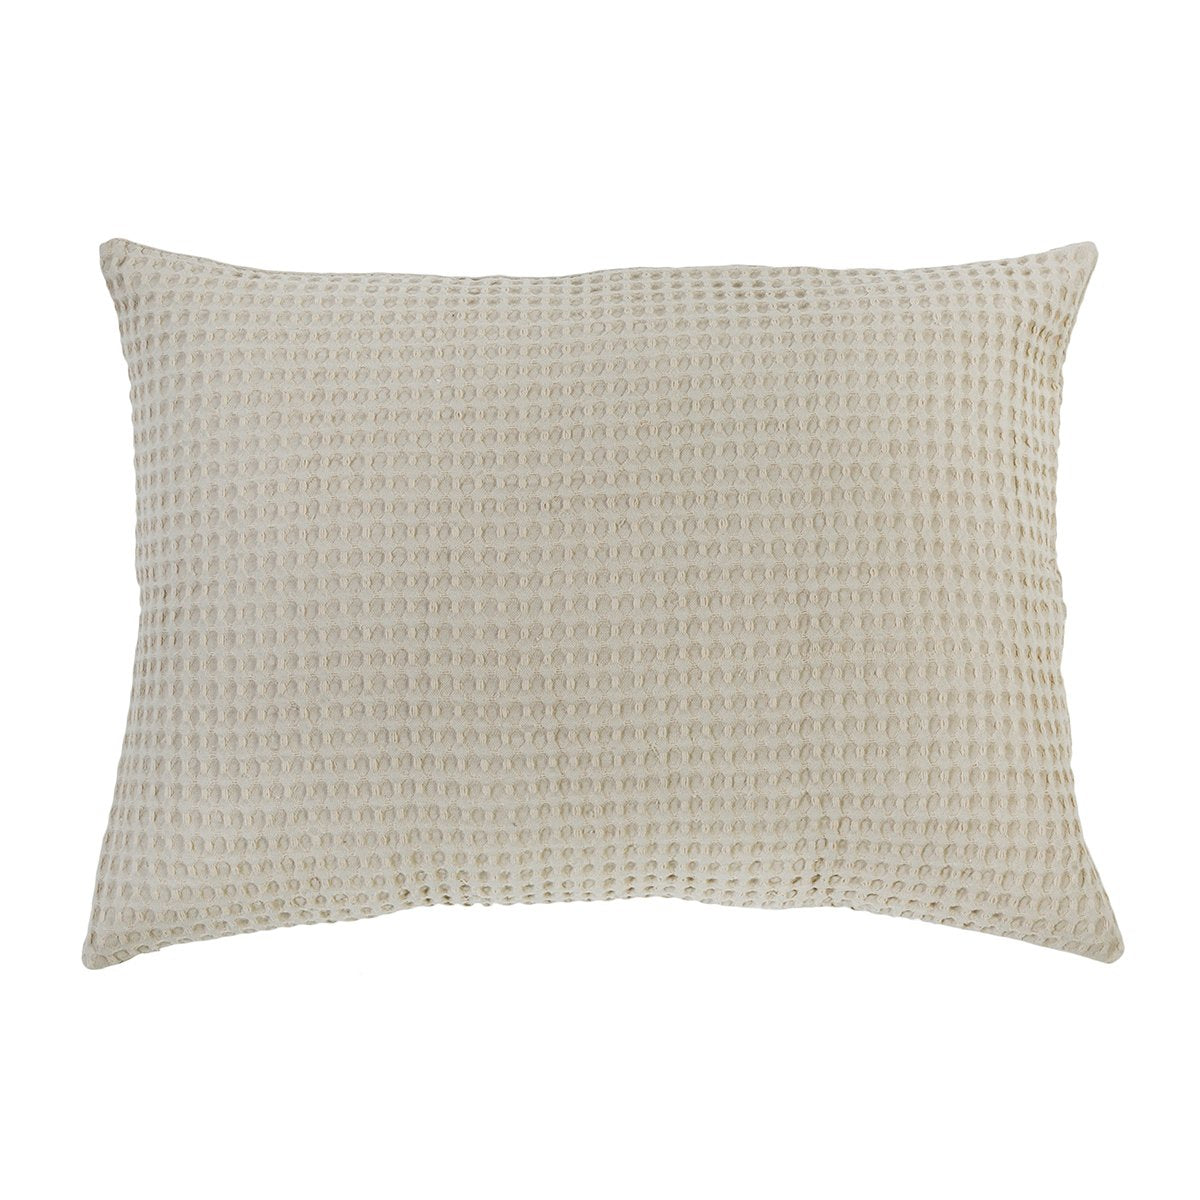 Zuma BIG PILLOW 28&quot; X 36&quot; WITH INSERT - Natural-Pom Pom at Home